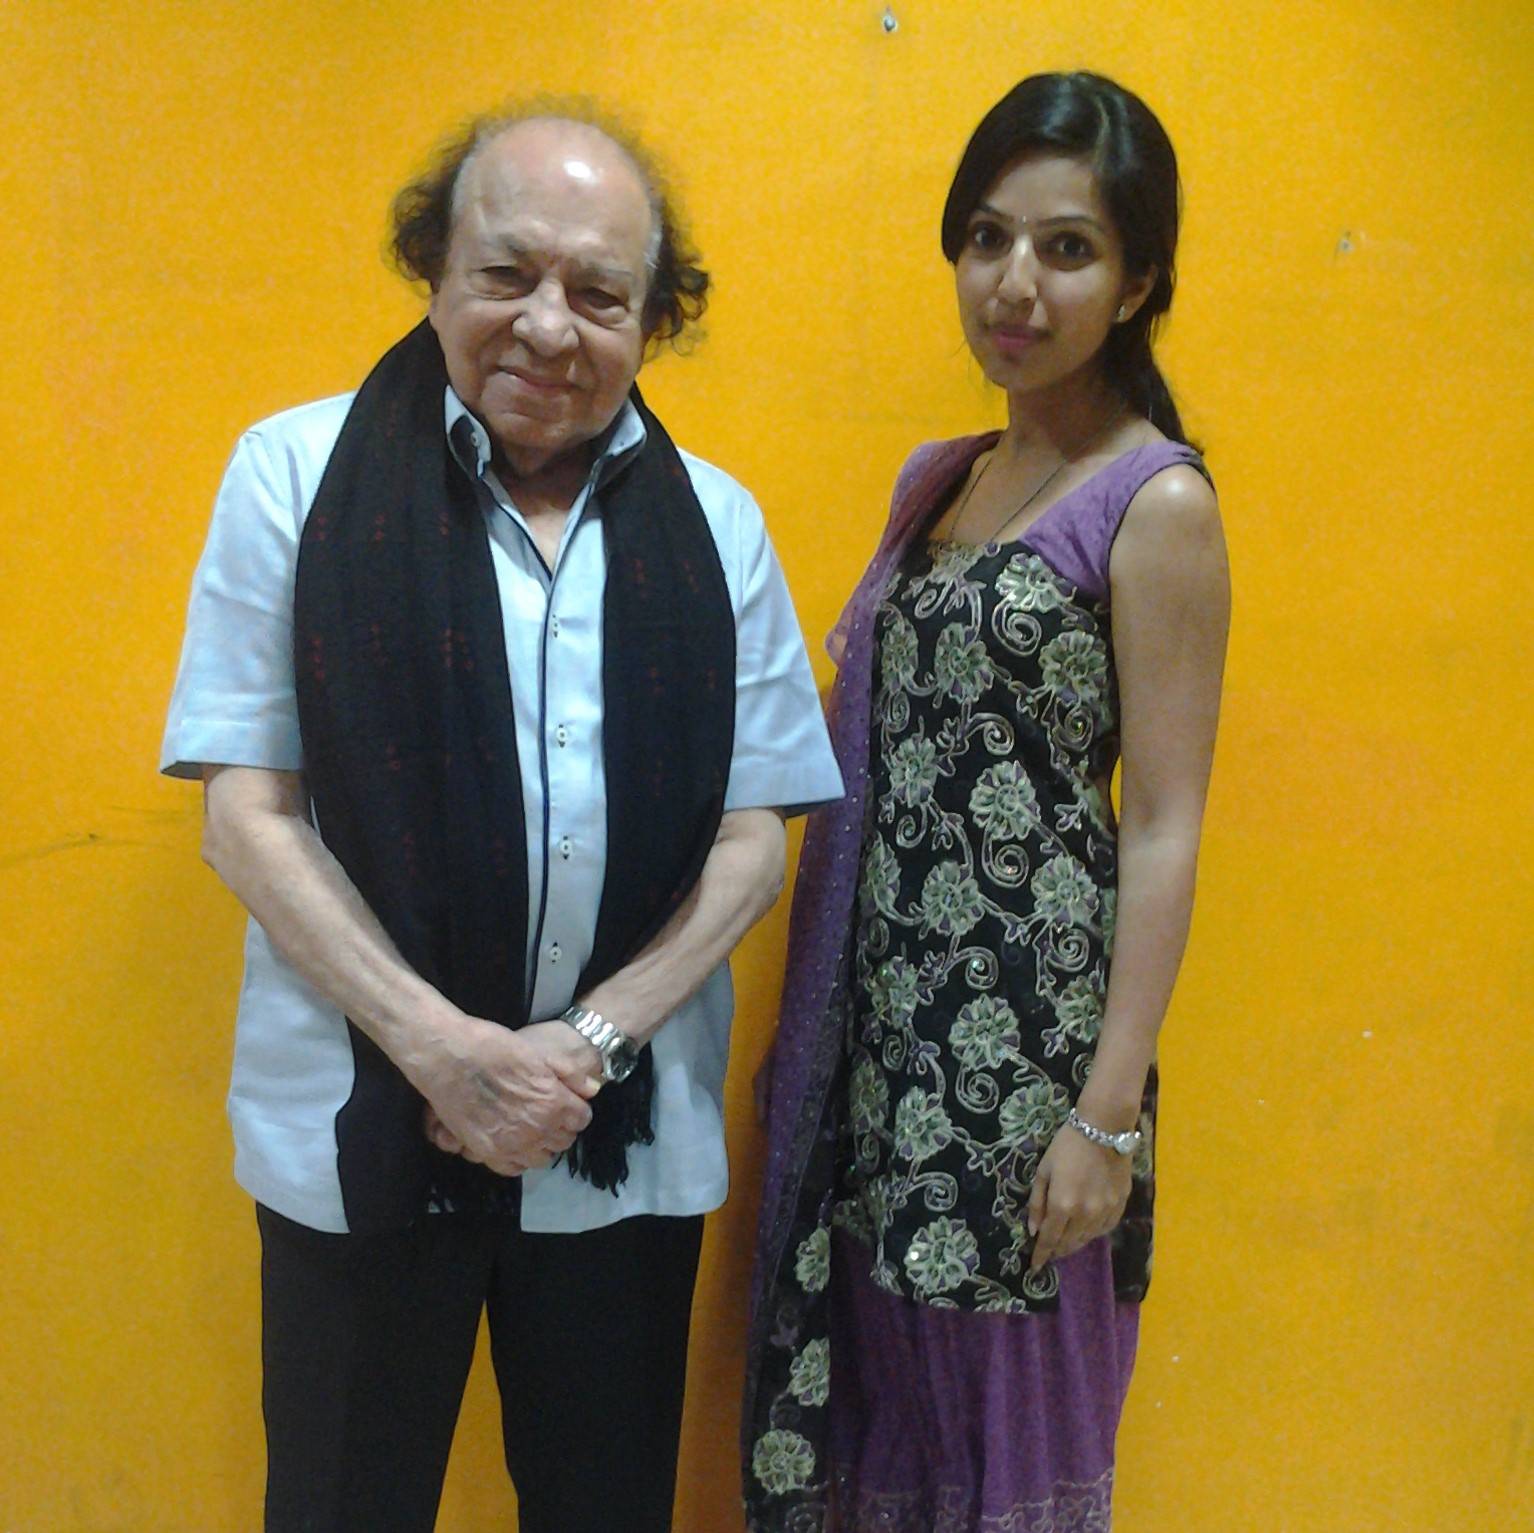 Creative Director and founder of Dance Expression Studio, Neha with celebrity acting coach, Roshan Taneja.